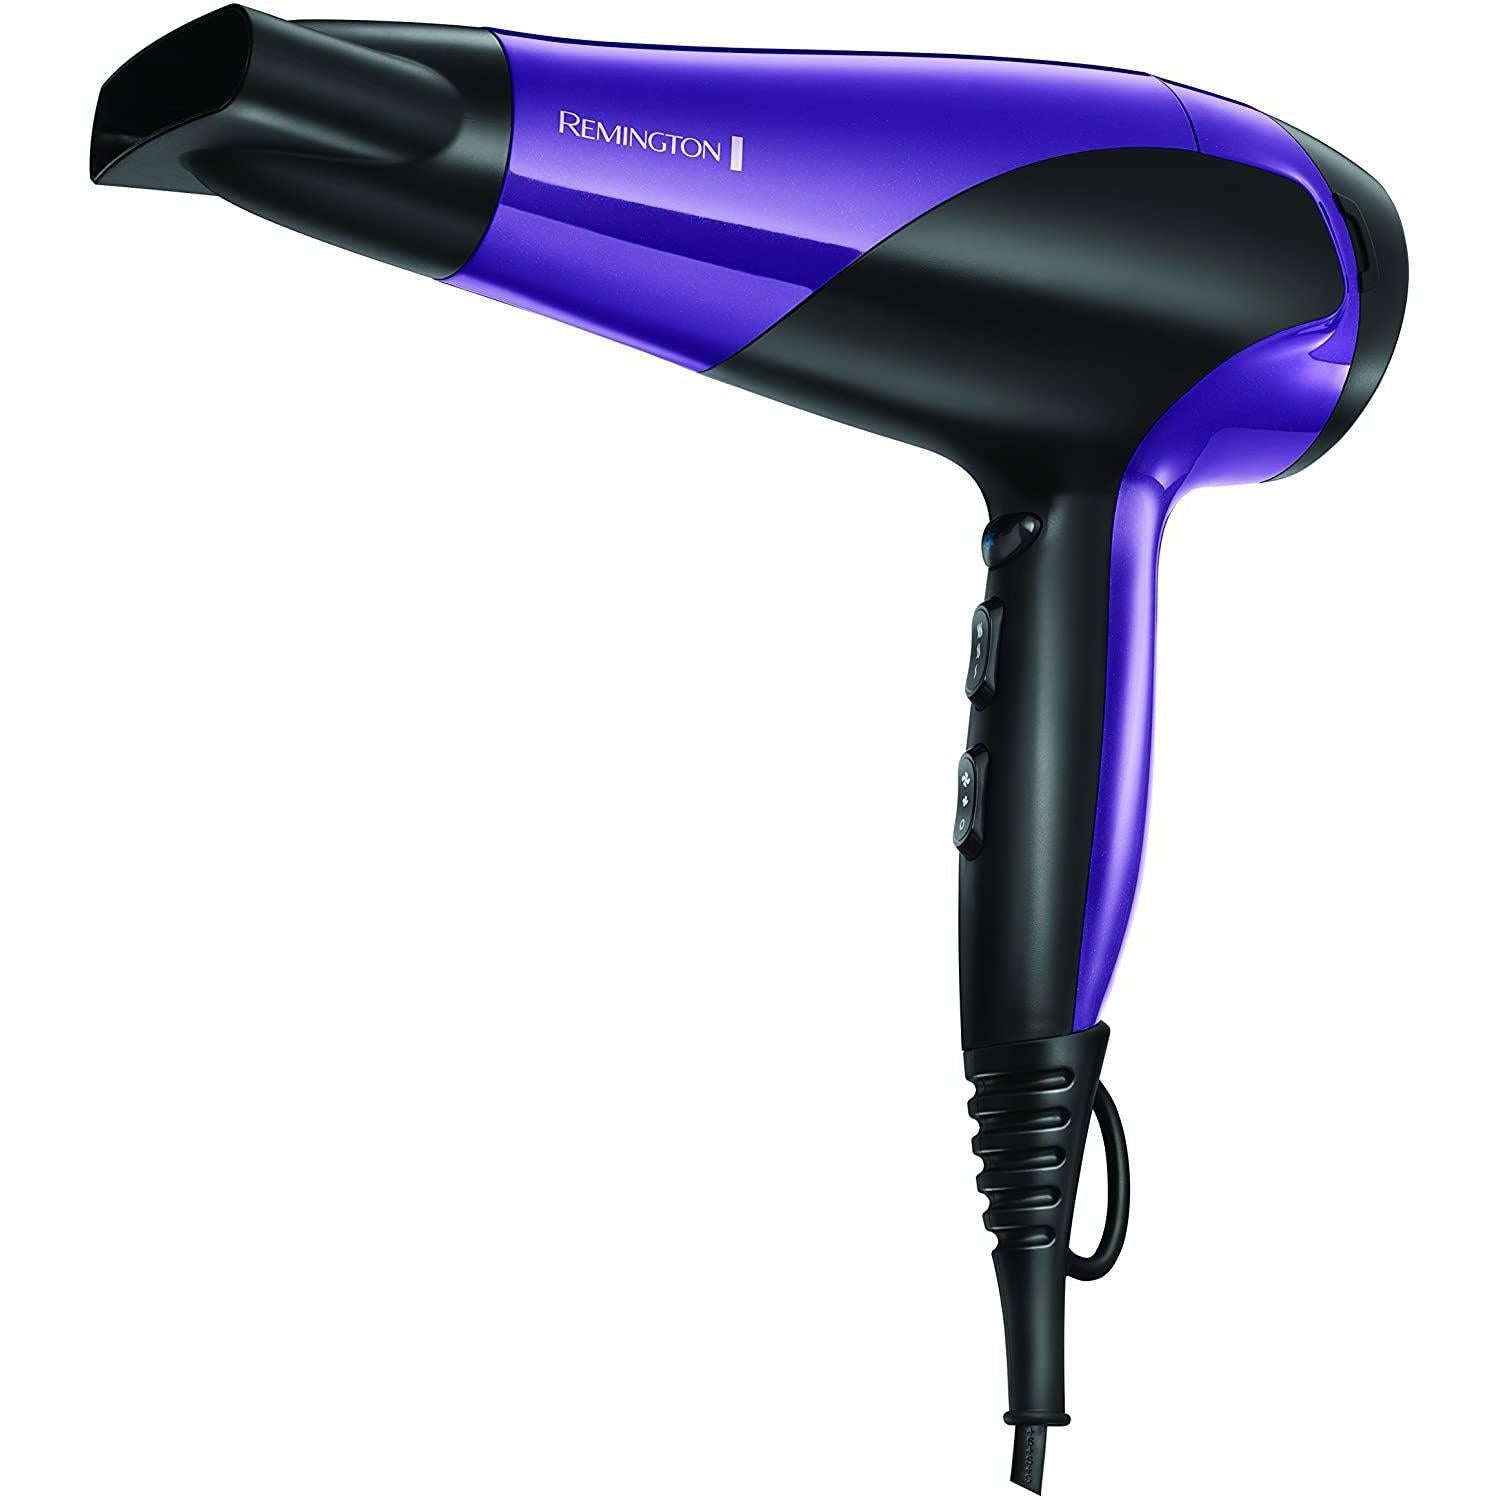 Remington D3190 Ionic Conditioning Hair Dryer for Frizz Free Styling with Diffuser and Concentrator Attachments, 2200 W - Healthxpress.ie